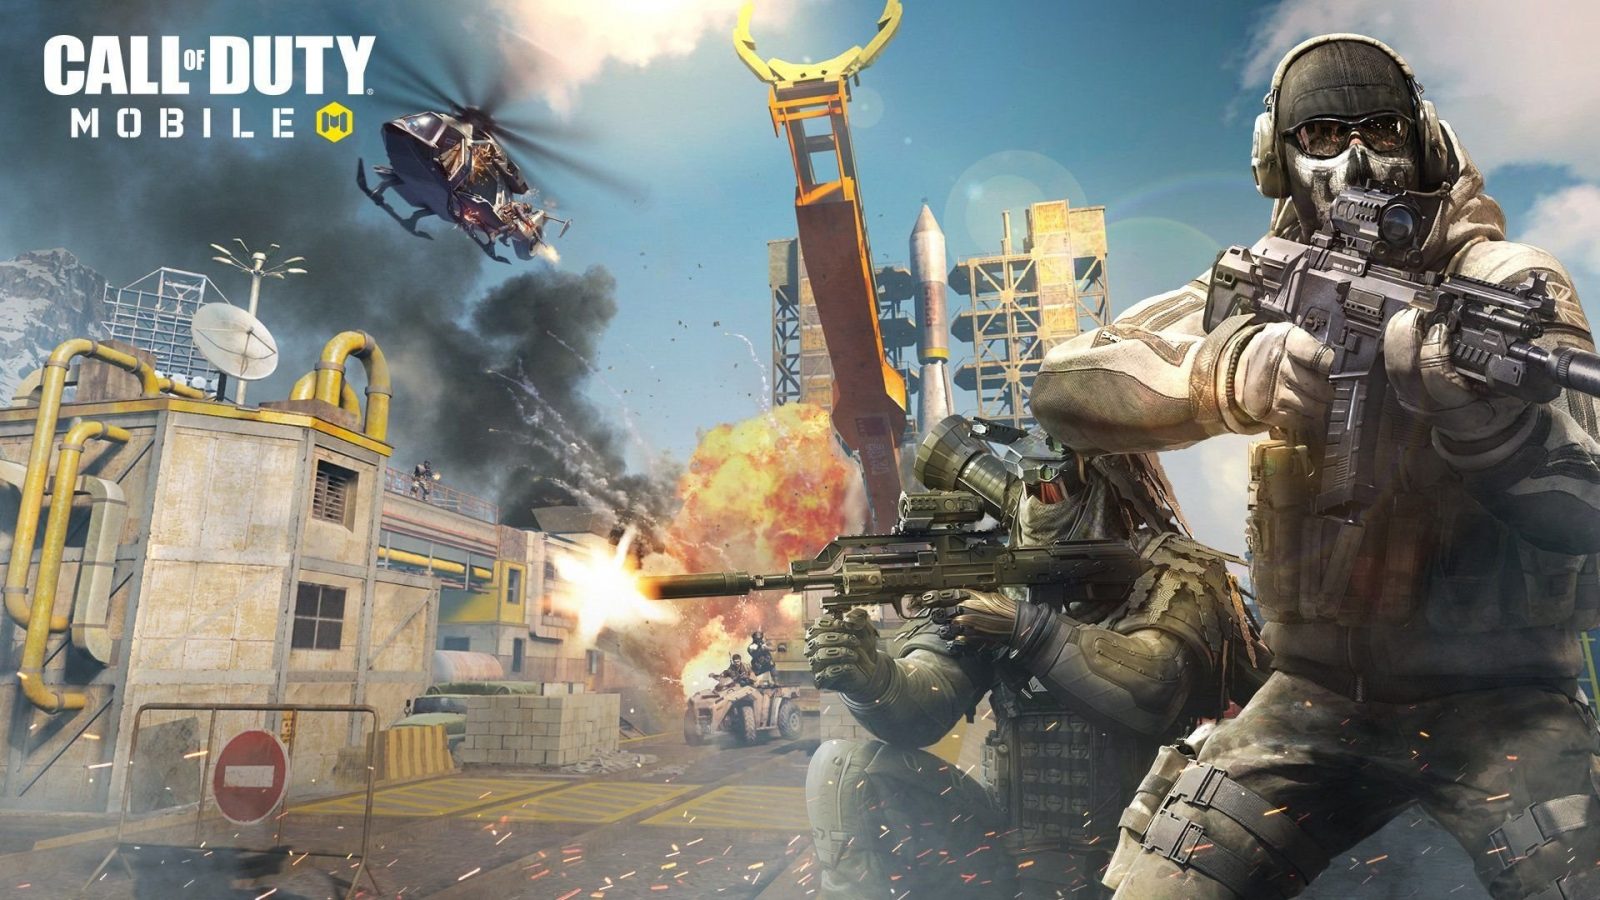 Beware Of Call Of Duty Mobile Apk Downloads Rampant Scams In The Name Of Hacks And Cheats